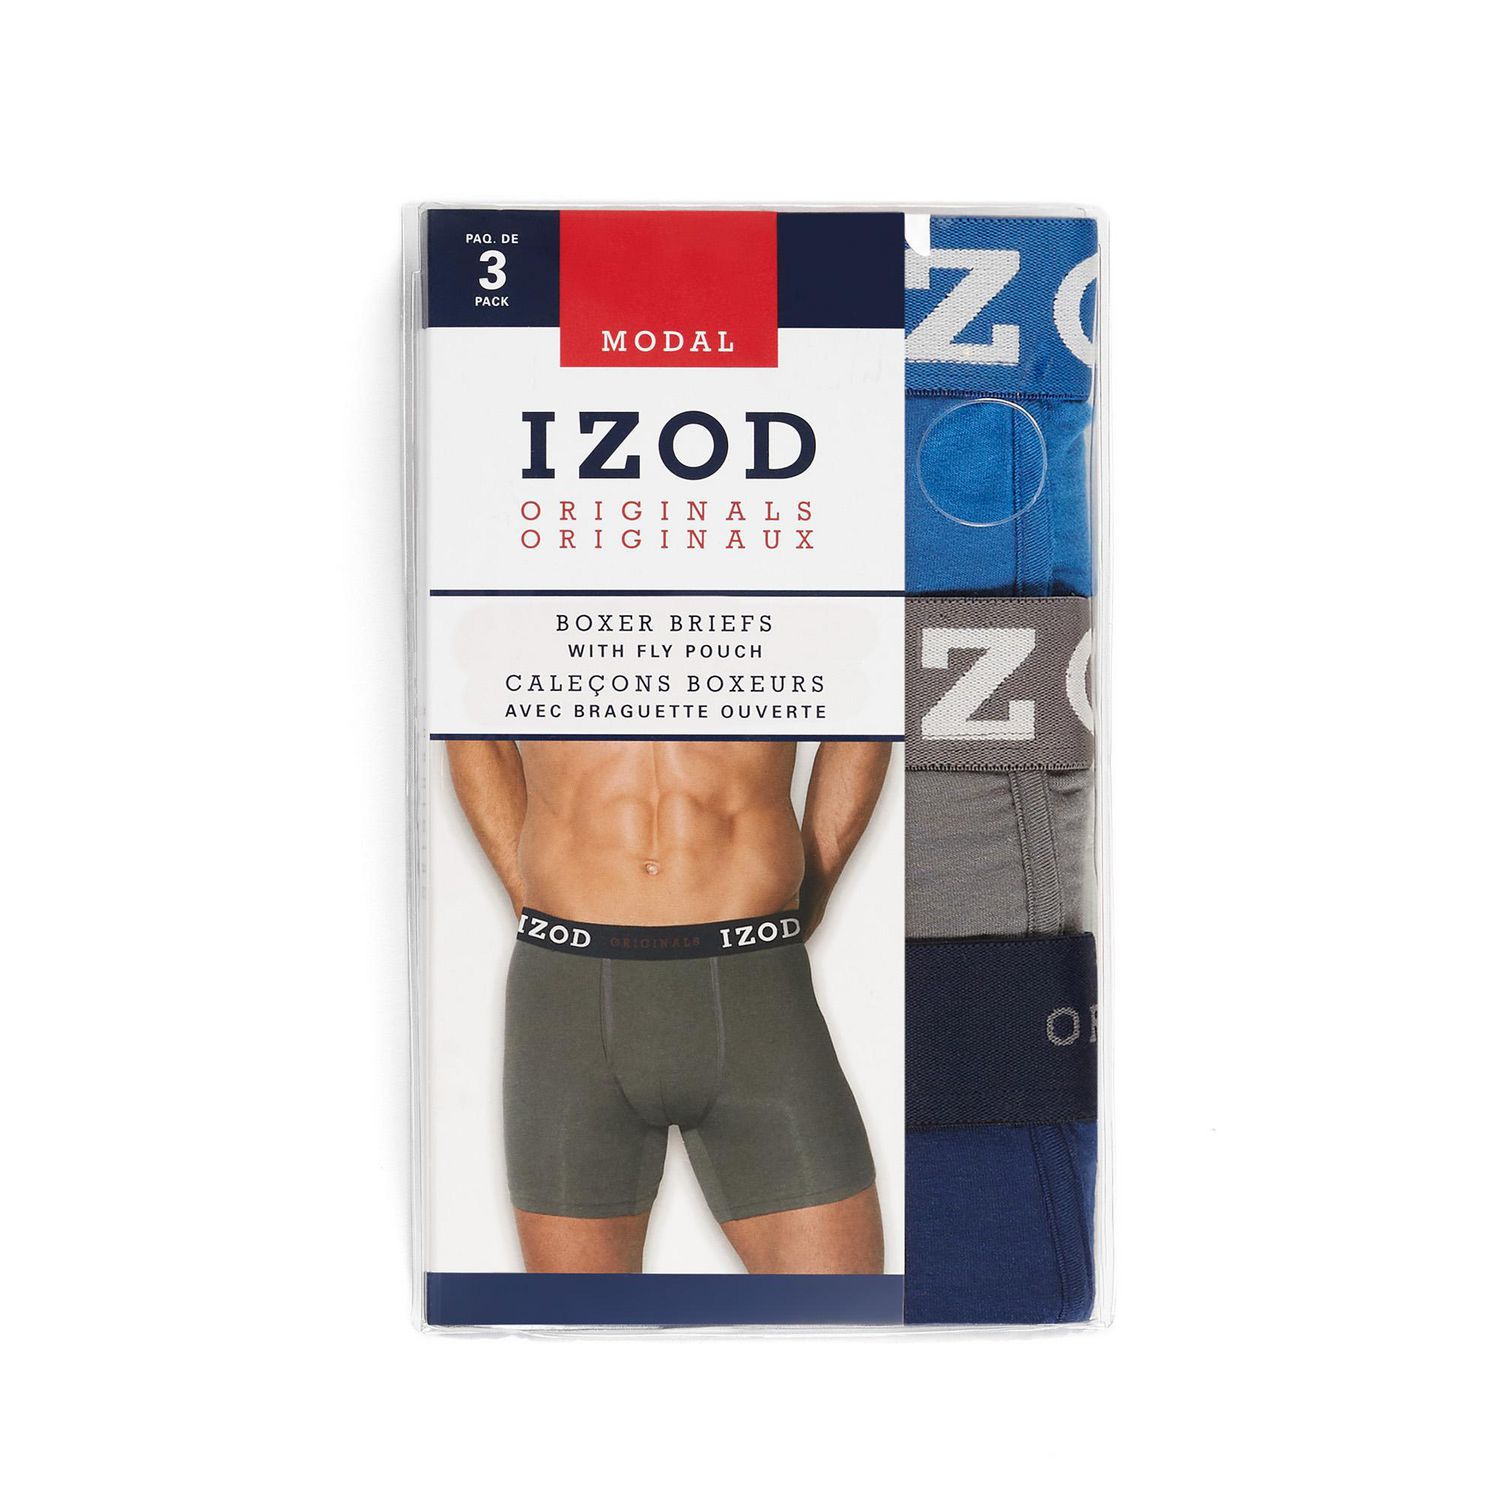 IZOD ORIGINALS Pack Boxer Briefs With Fly Pouch